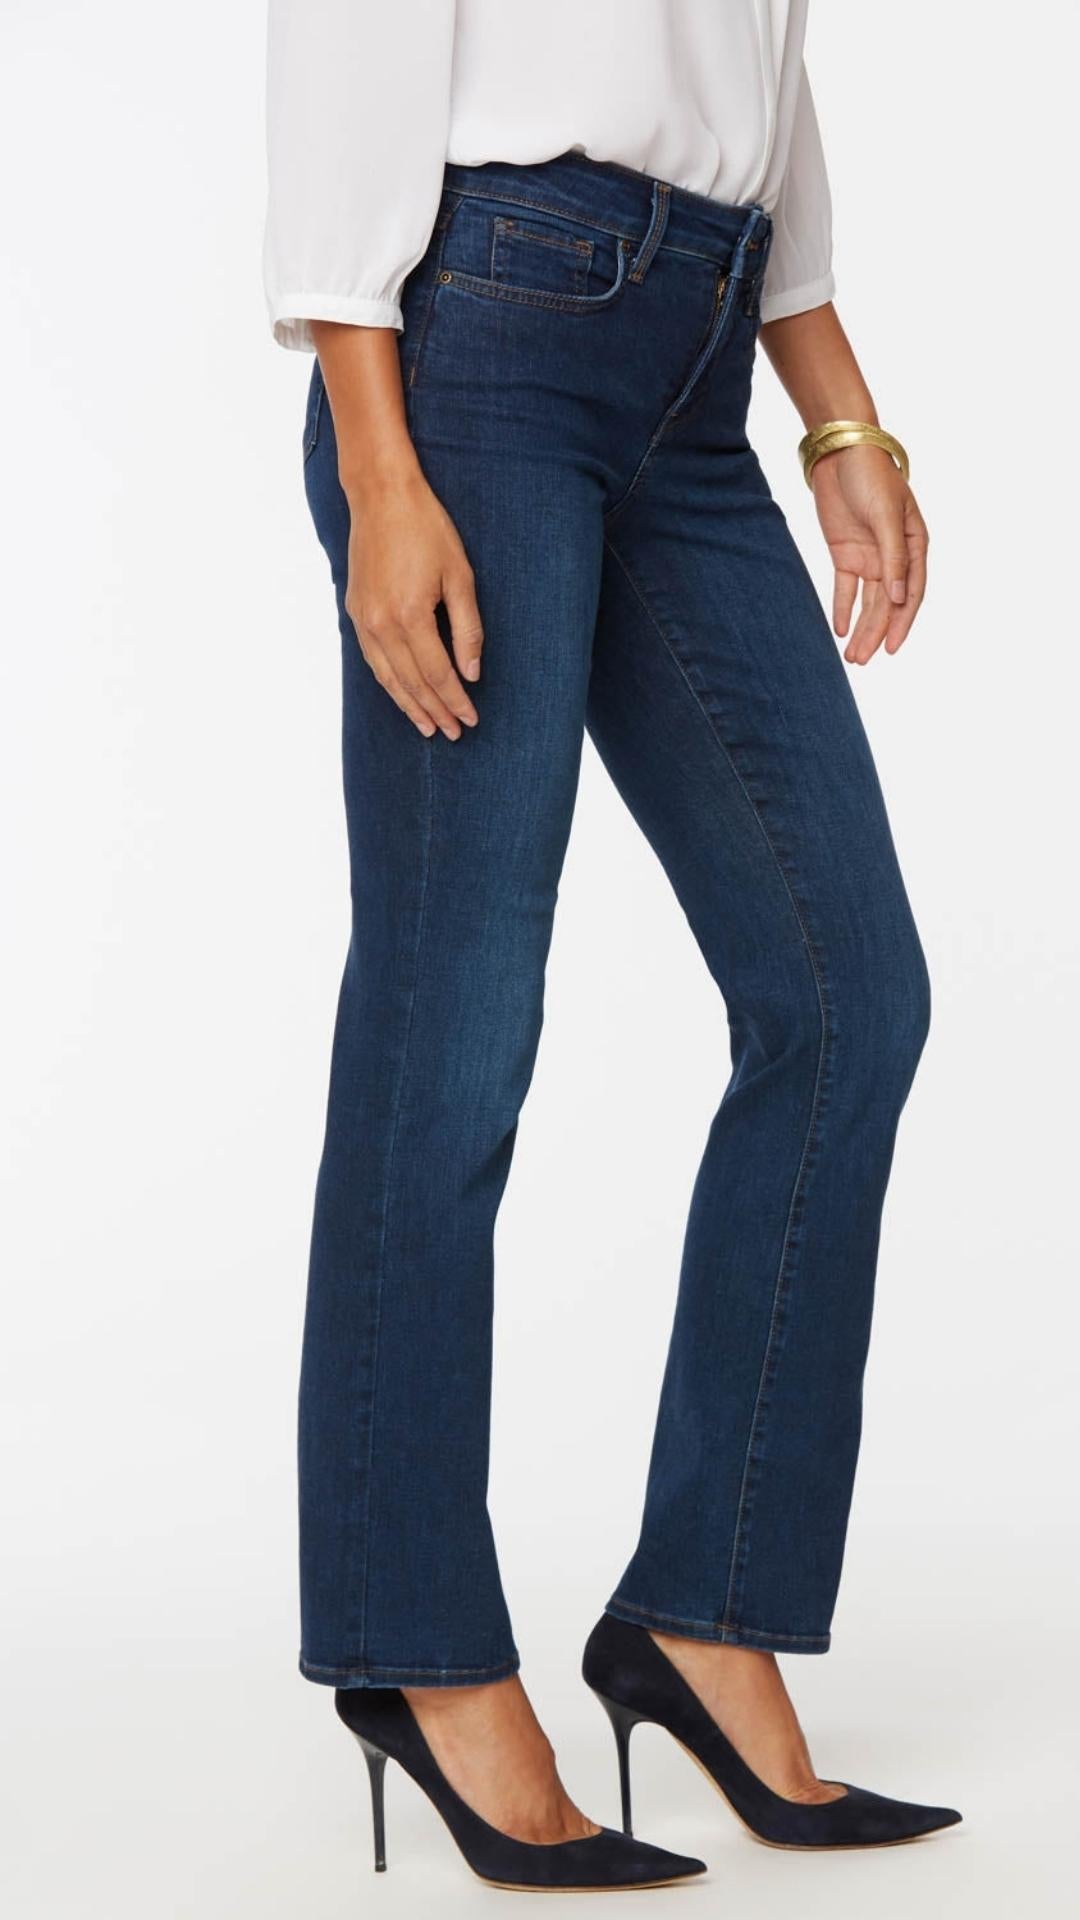 Nydj Women's Marilyn Straight Jeans with High Rise